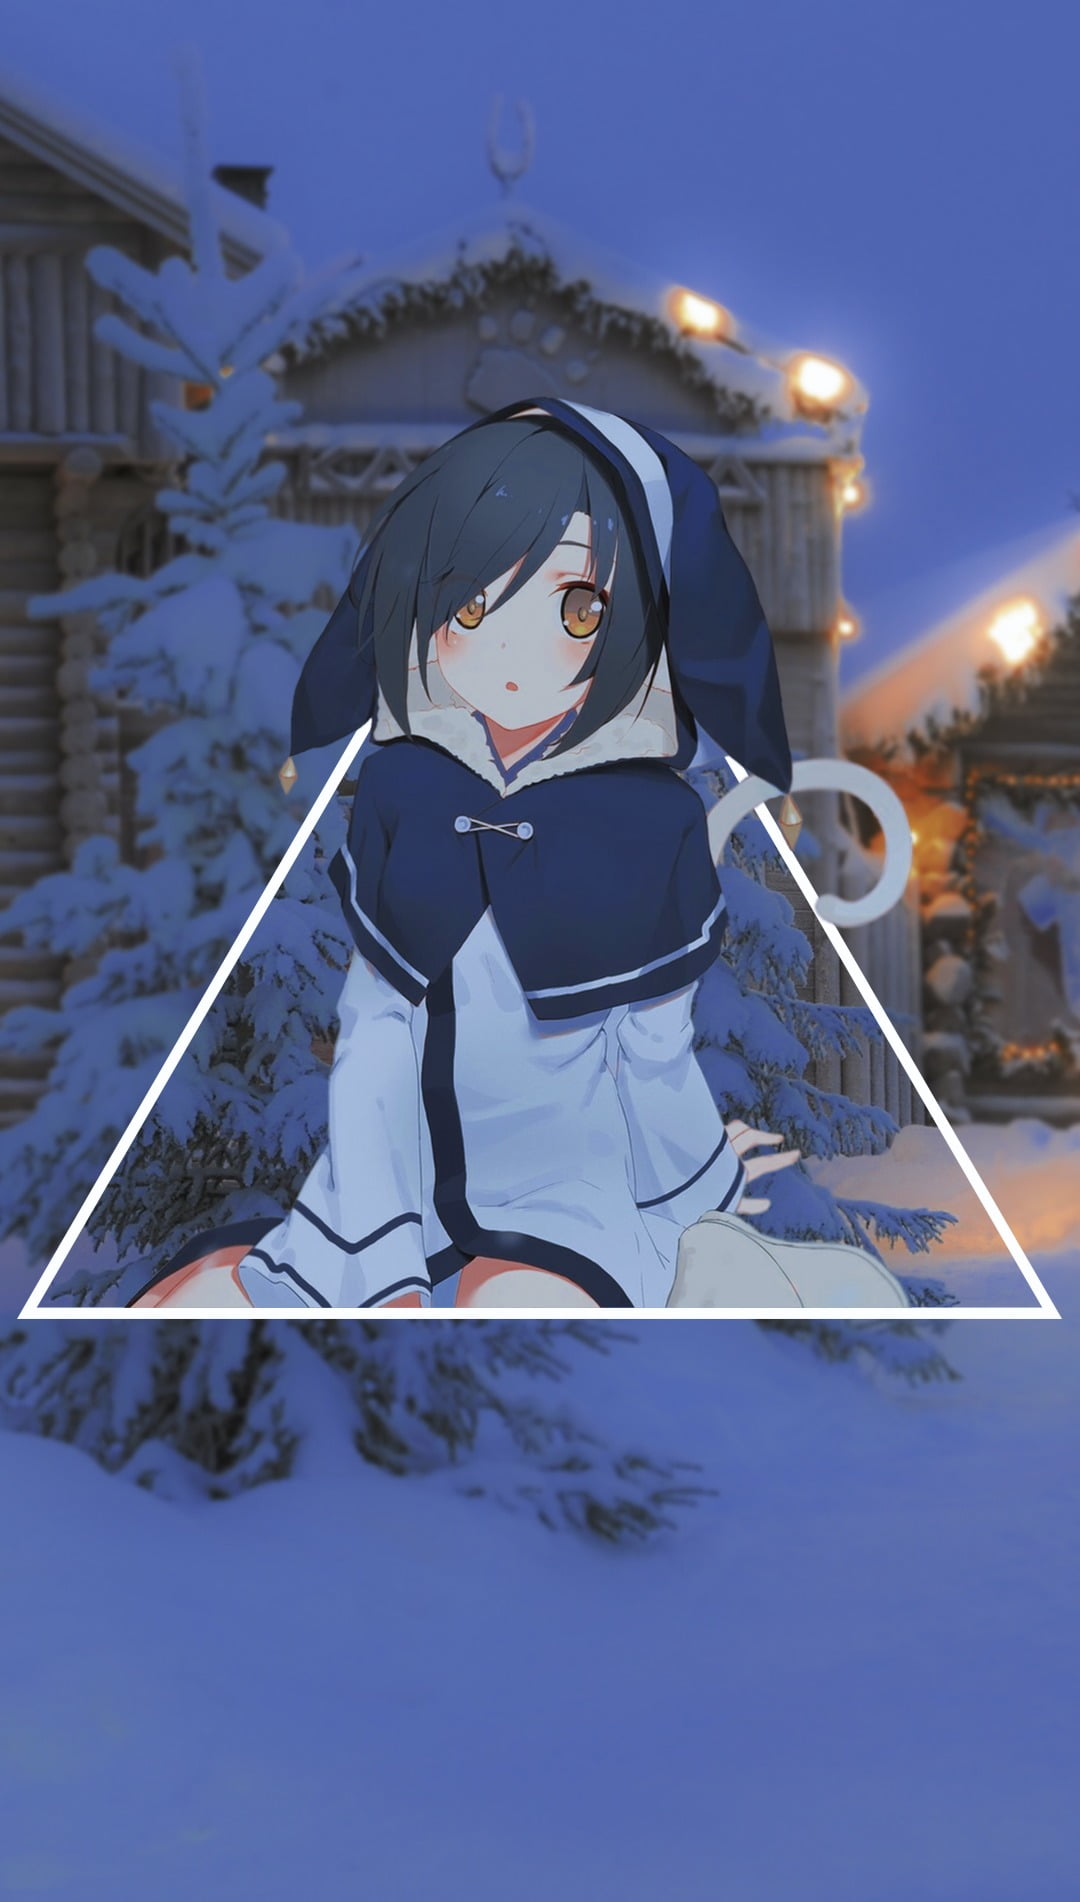 anime, anime girls, picture-in-picture, snow, winter, cold temperature